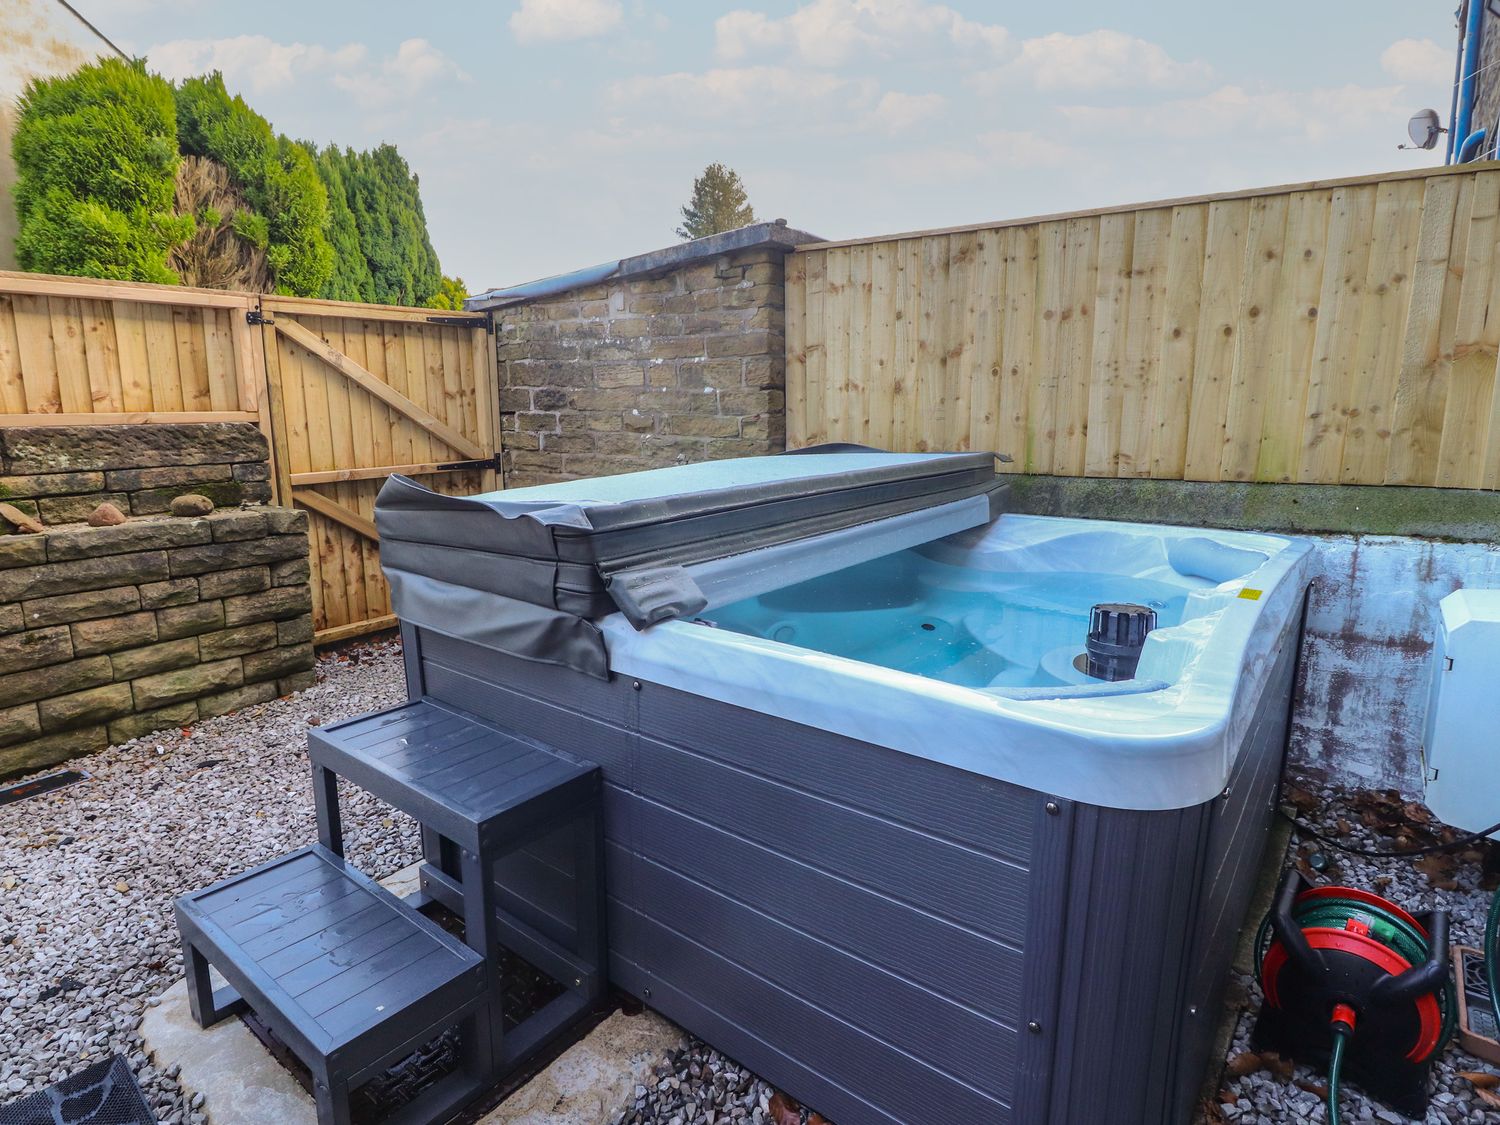 10 Haw Grove, Hellifield, North Yorkshire. Hot tub. Close to a shop and pub. Near National Park. TV.